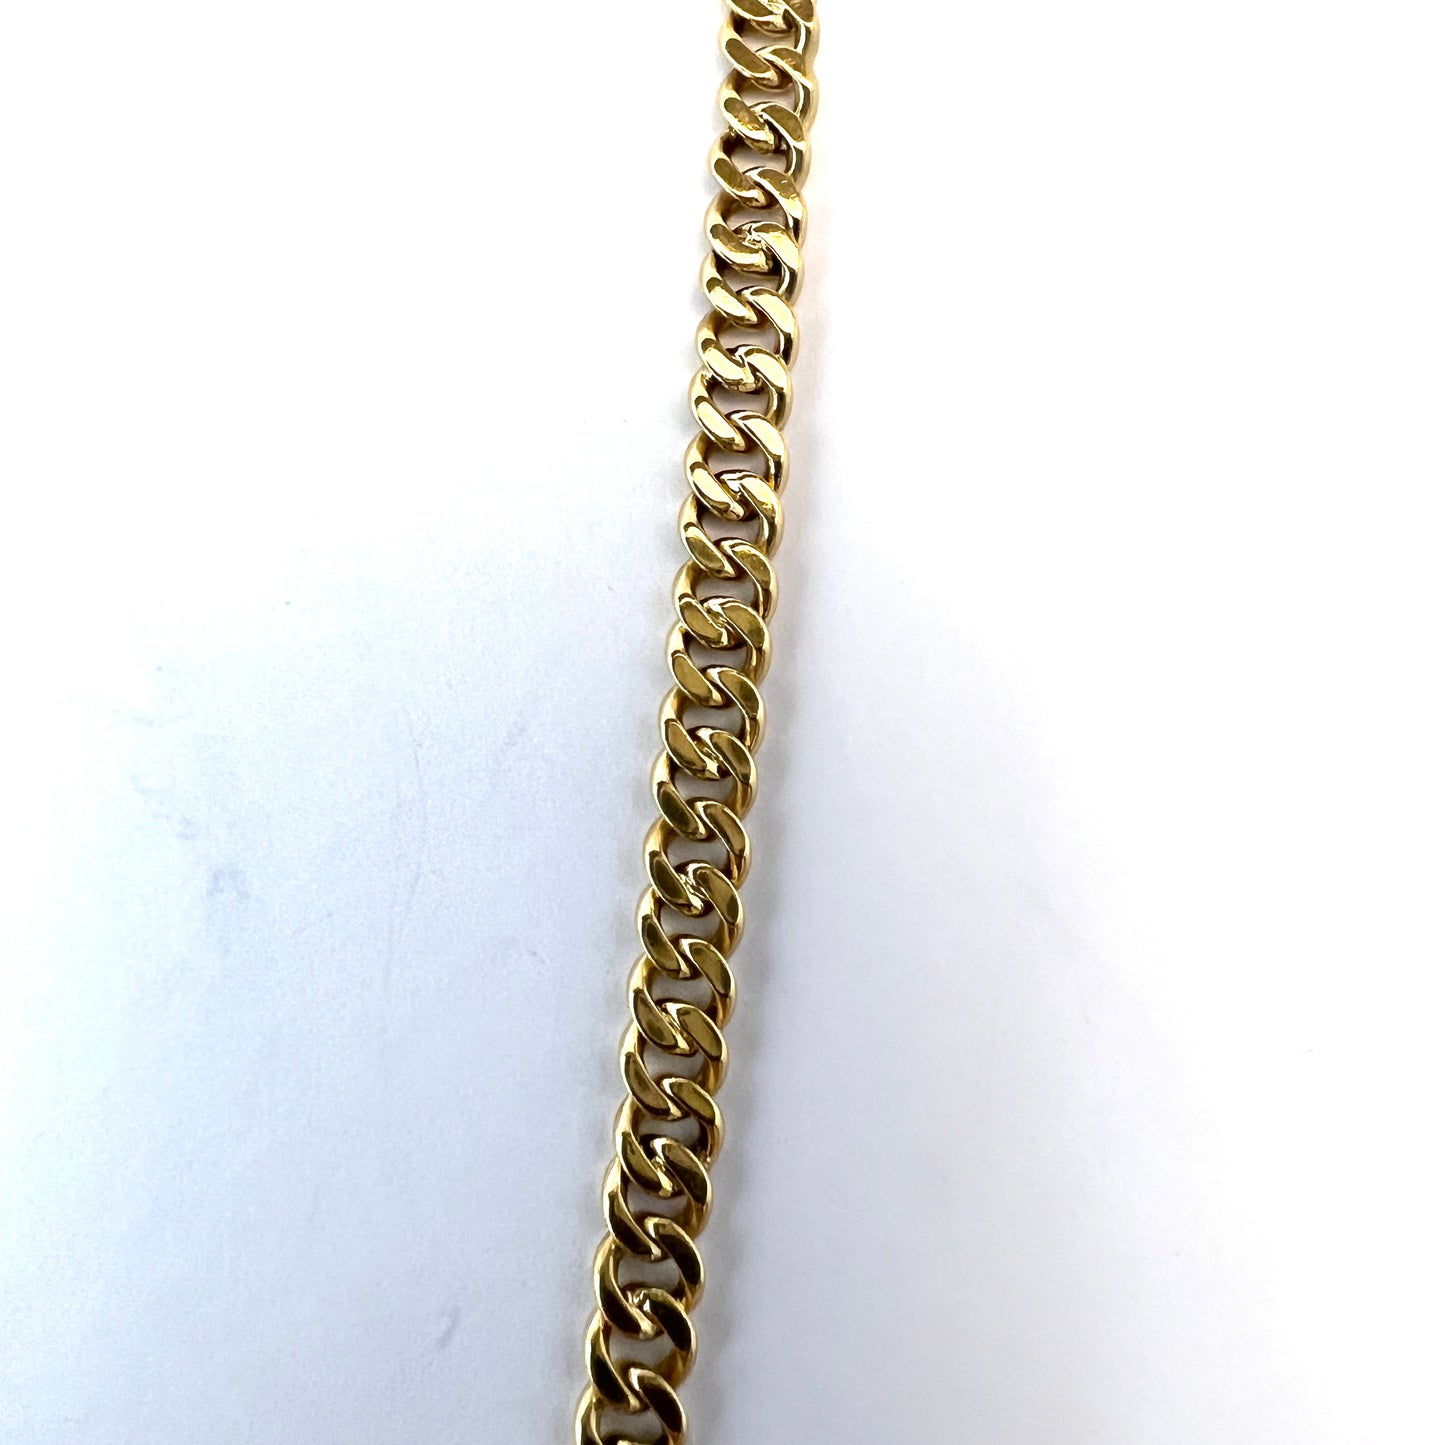 Sweden 1924. Antique 18k Gold Watch Chain in Necklace Length.